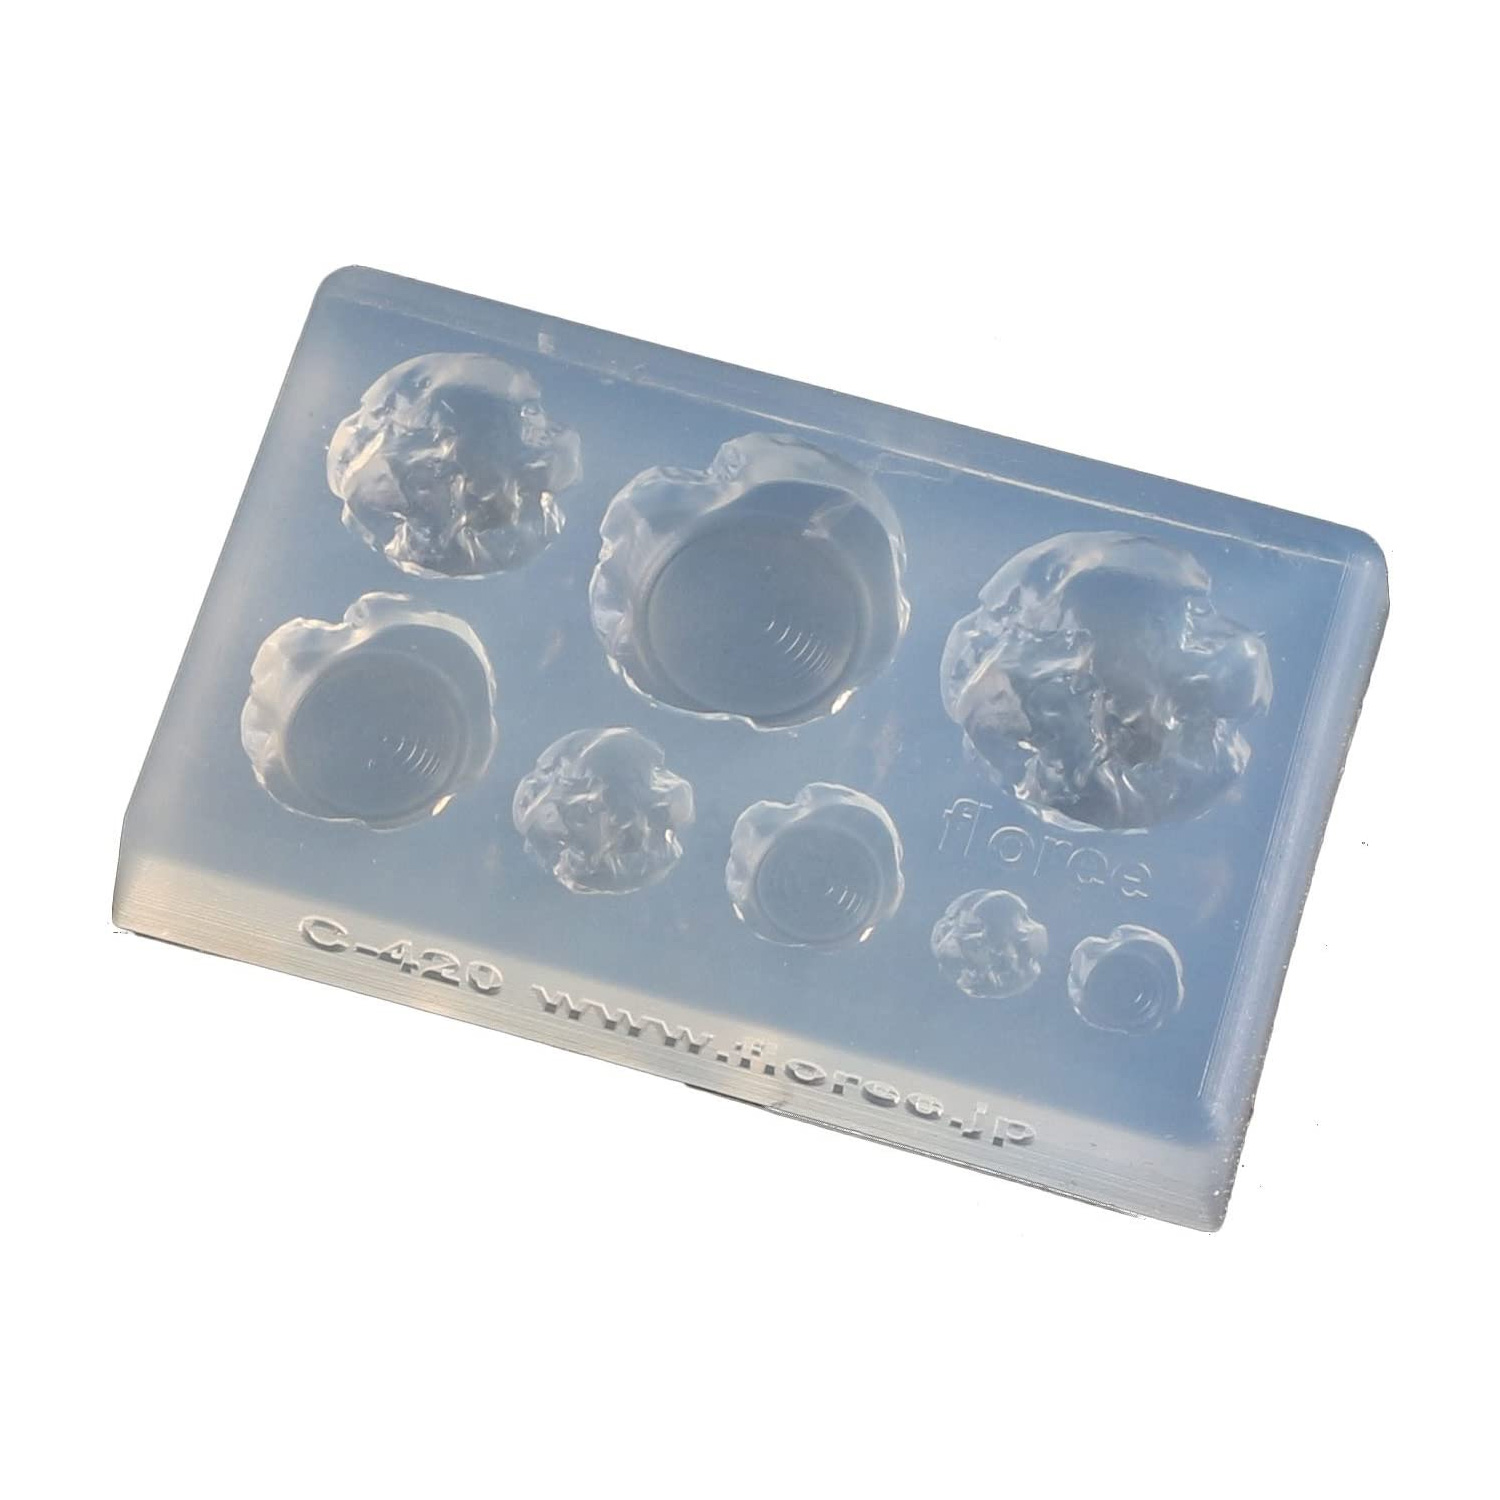 KAM-REJ-420  Resin Crafting Silicone Mold  (pcs)